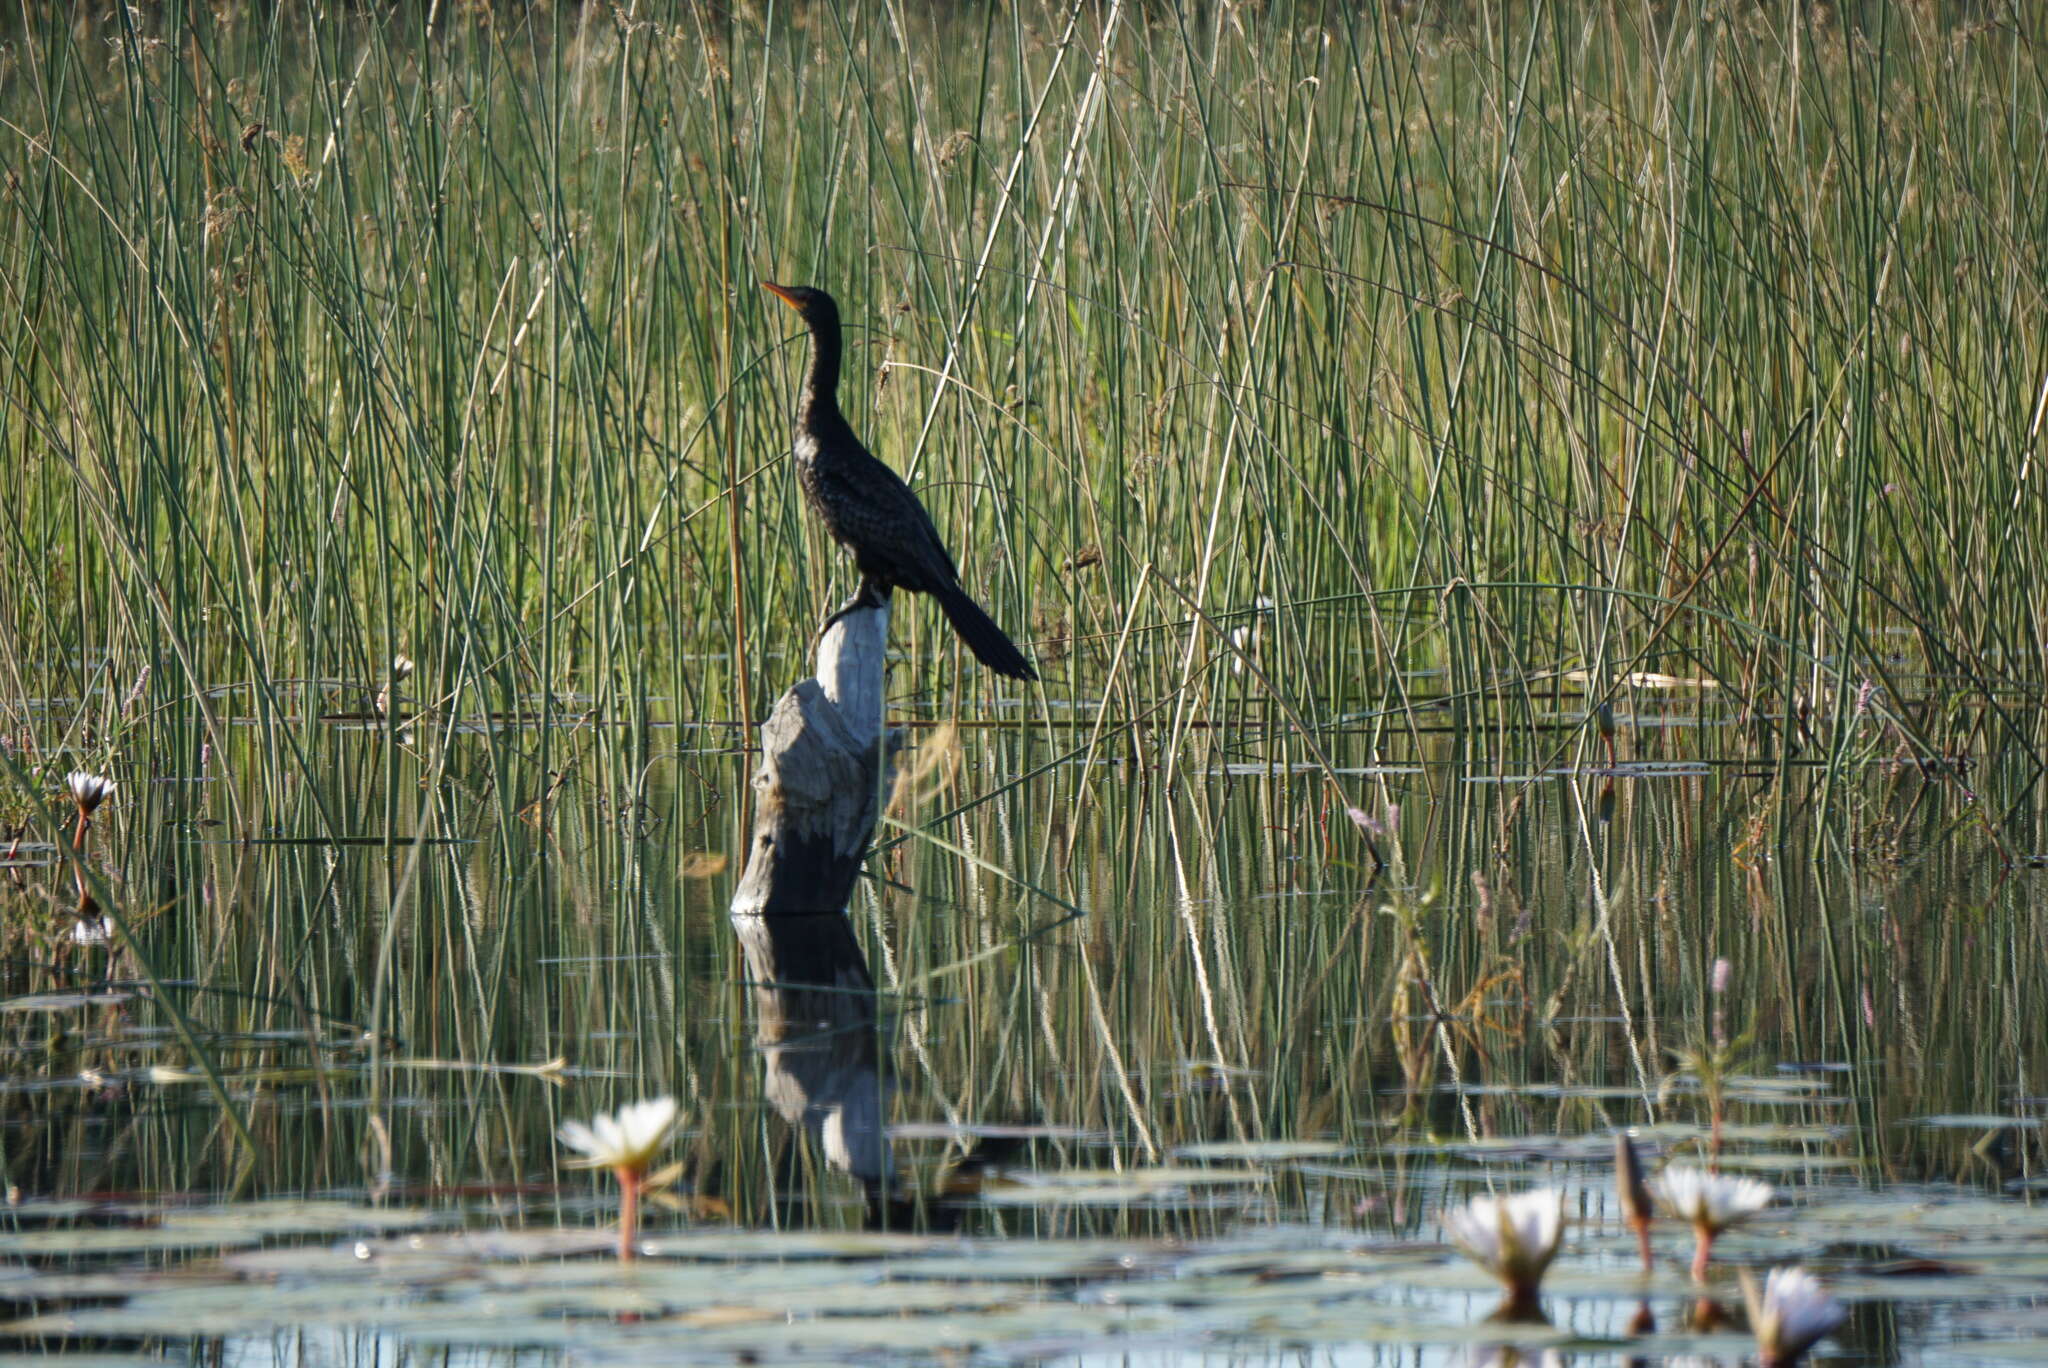 Image of Long-tailed Cormorant